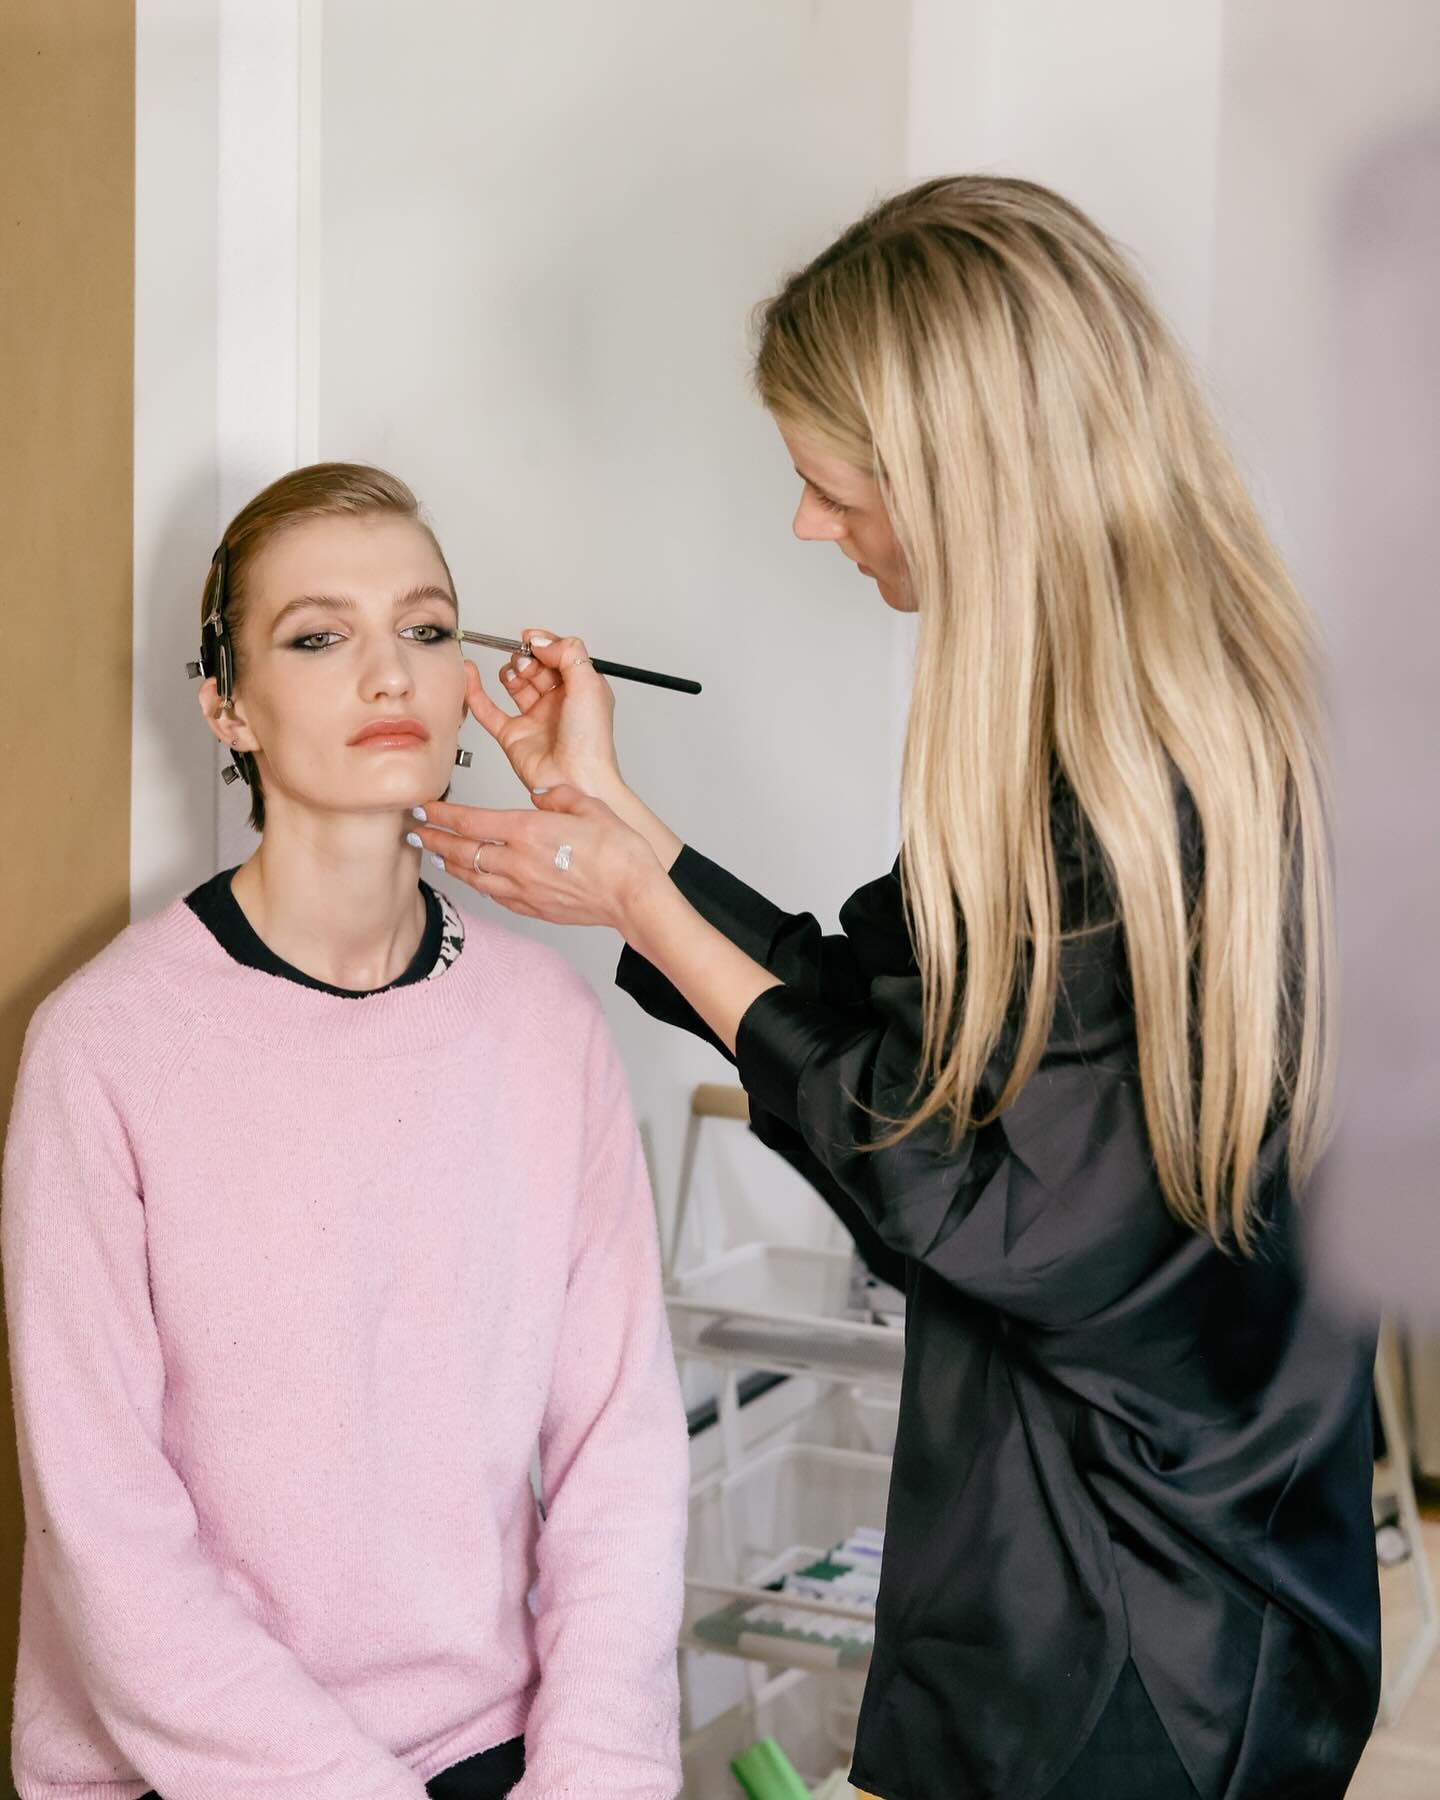 Behind the scenes moments with the wonderful Make-up Artist @hannahrosieb and her team with @francon_editions 

Make-up Assistants: @bjornmoesman @ira.h_
@marlyvandenbosch
Hair key @wiardi.koopmeiners
Assisted by @marrrjooo
Models:
Faye @moxiemodels.